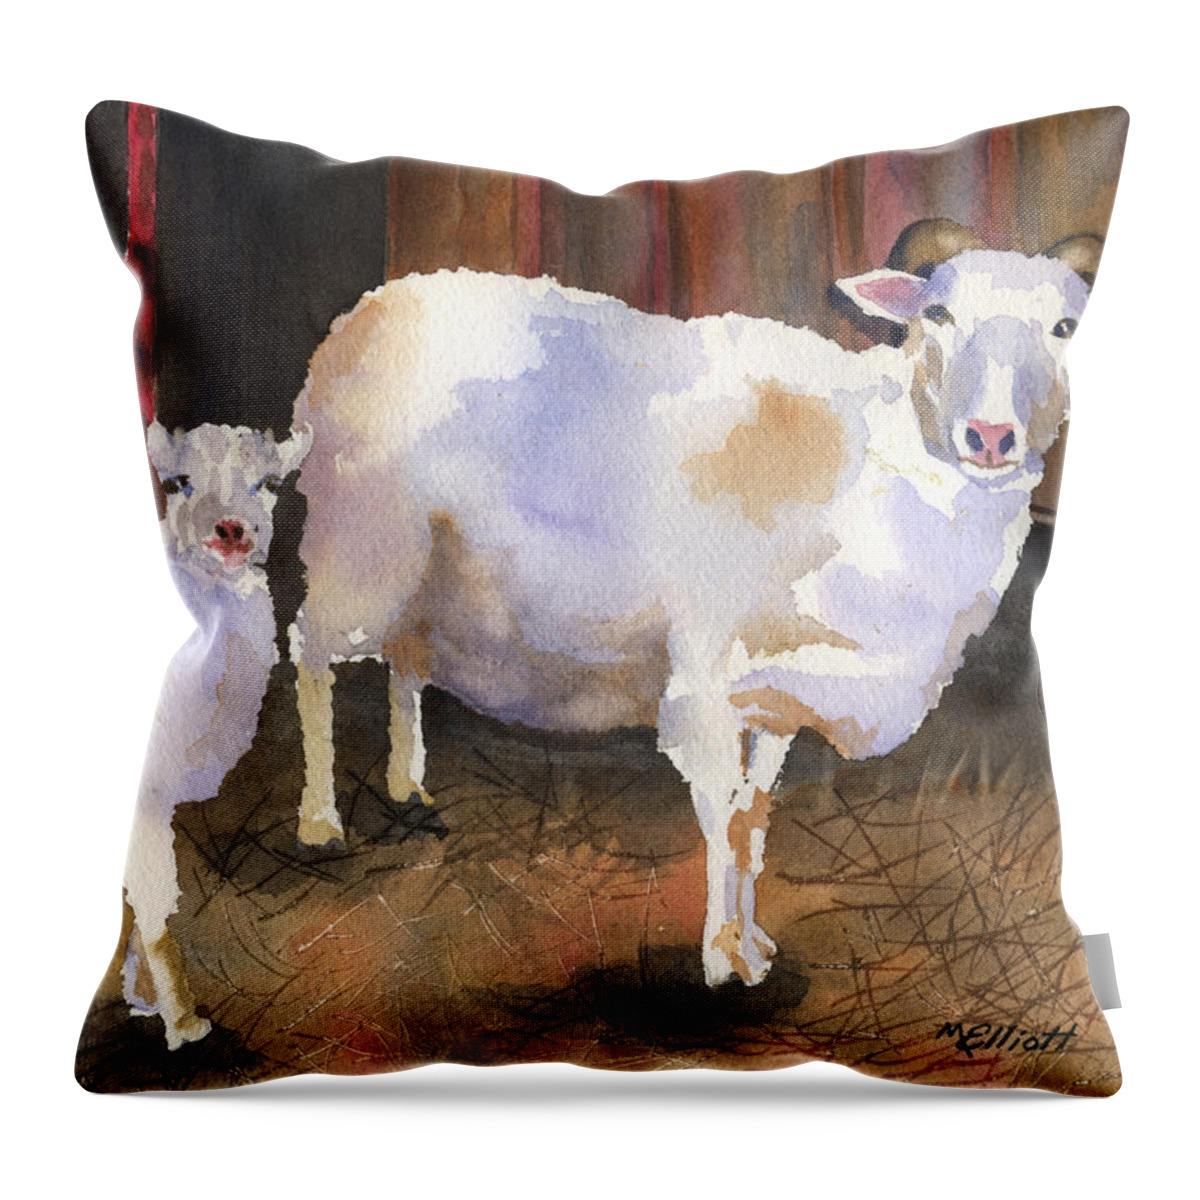 Lamb Throw Pillow featuring the painting In For the Night by Marsha Elliott